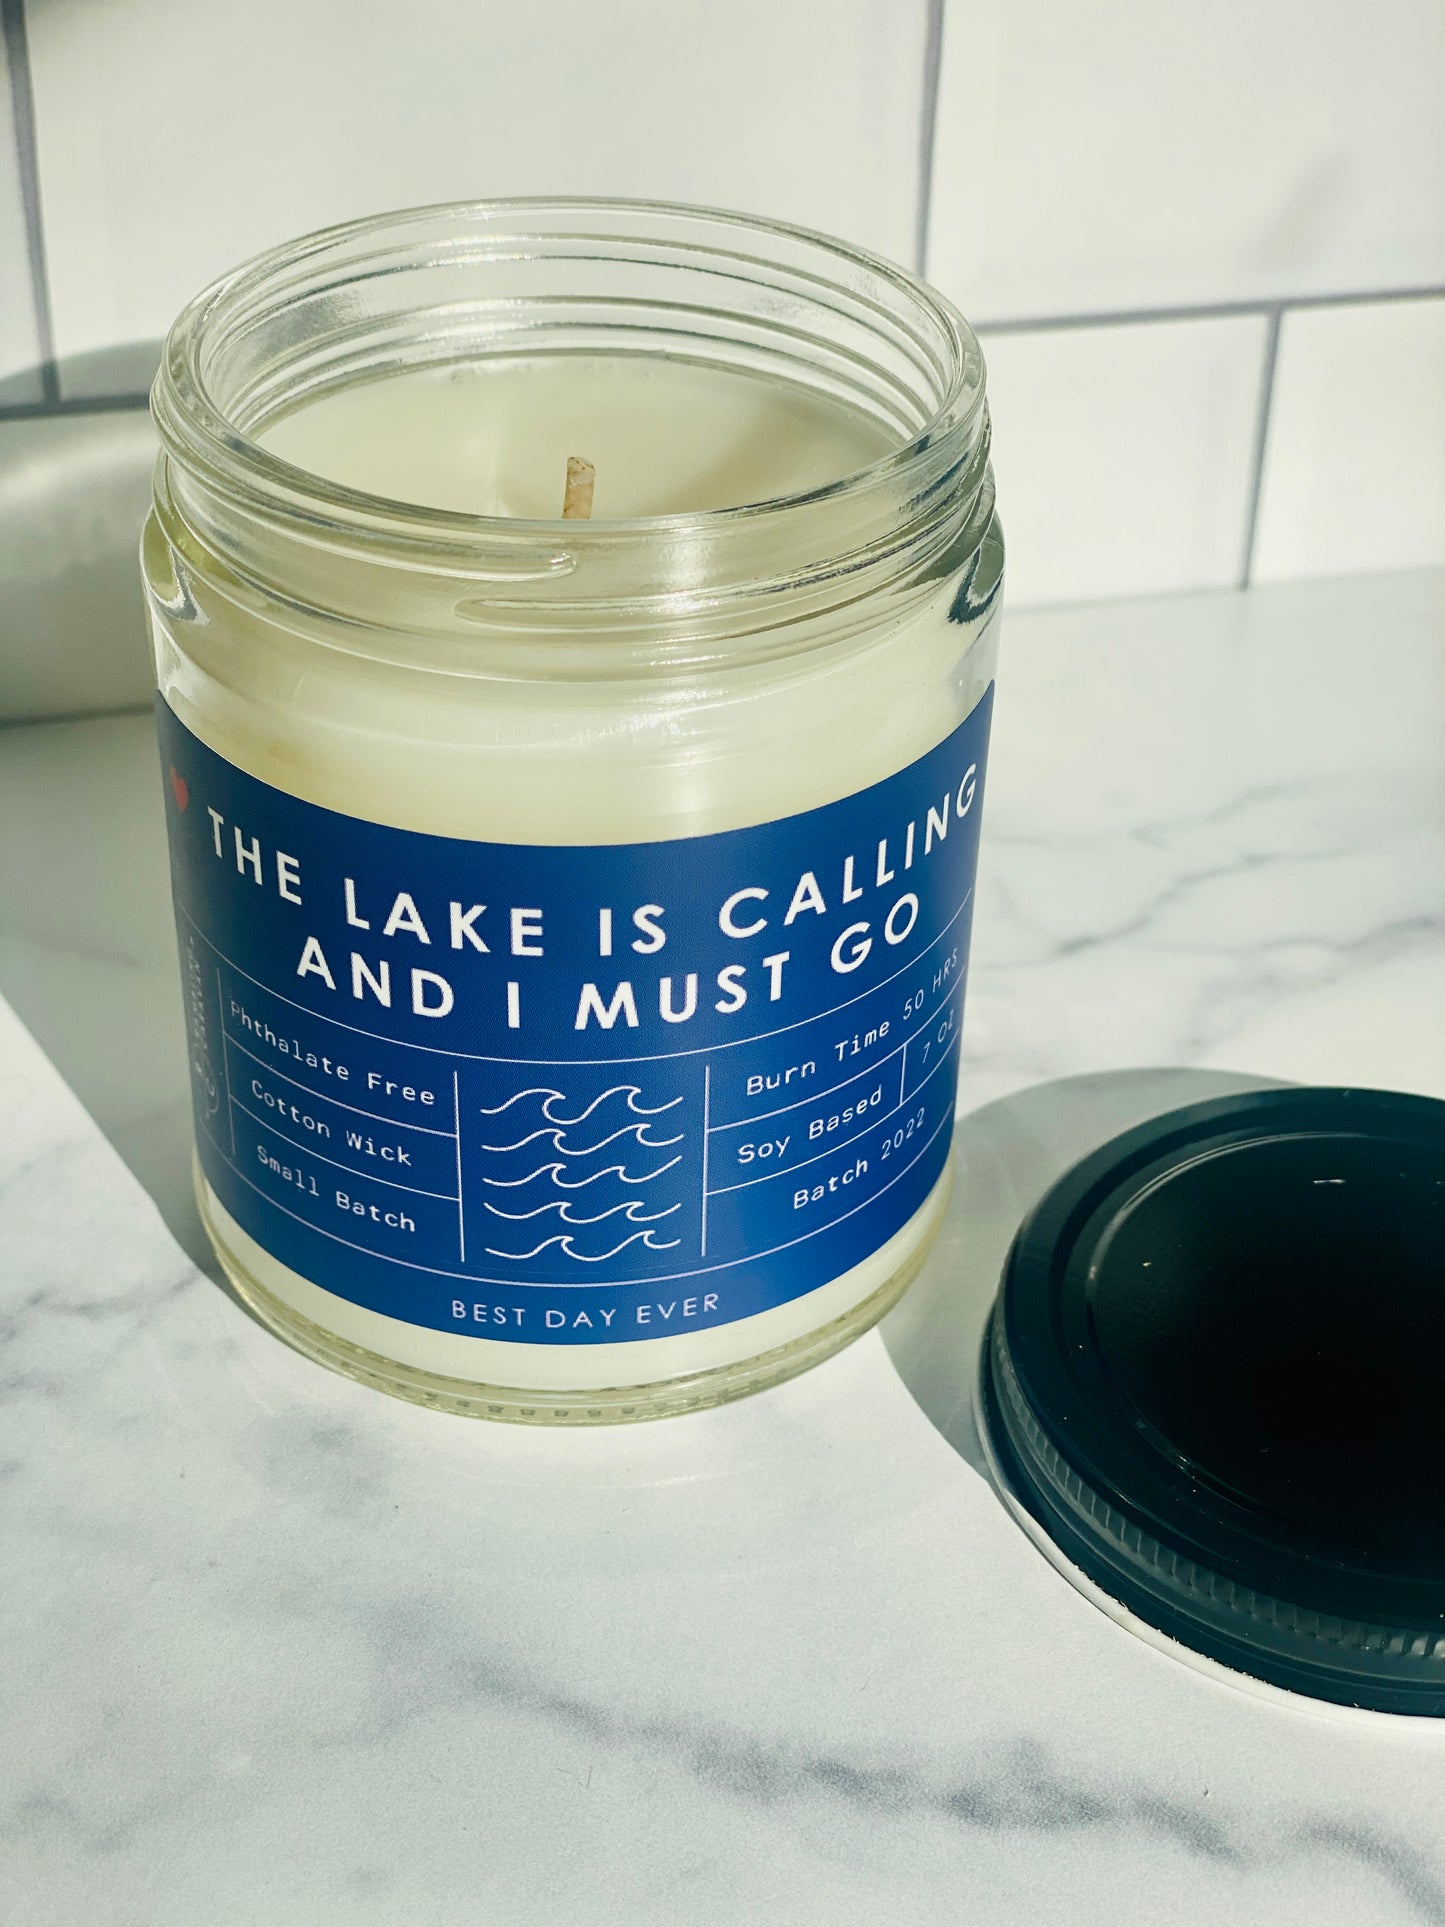 The Lake Is Calling And I Must Go Candle